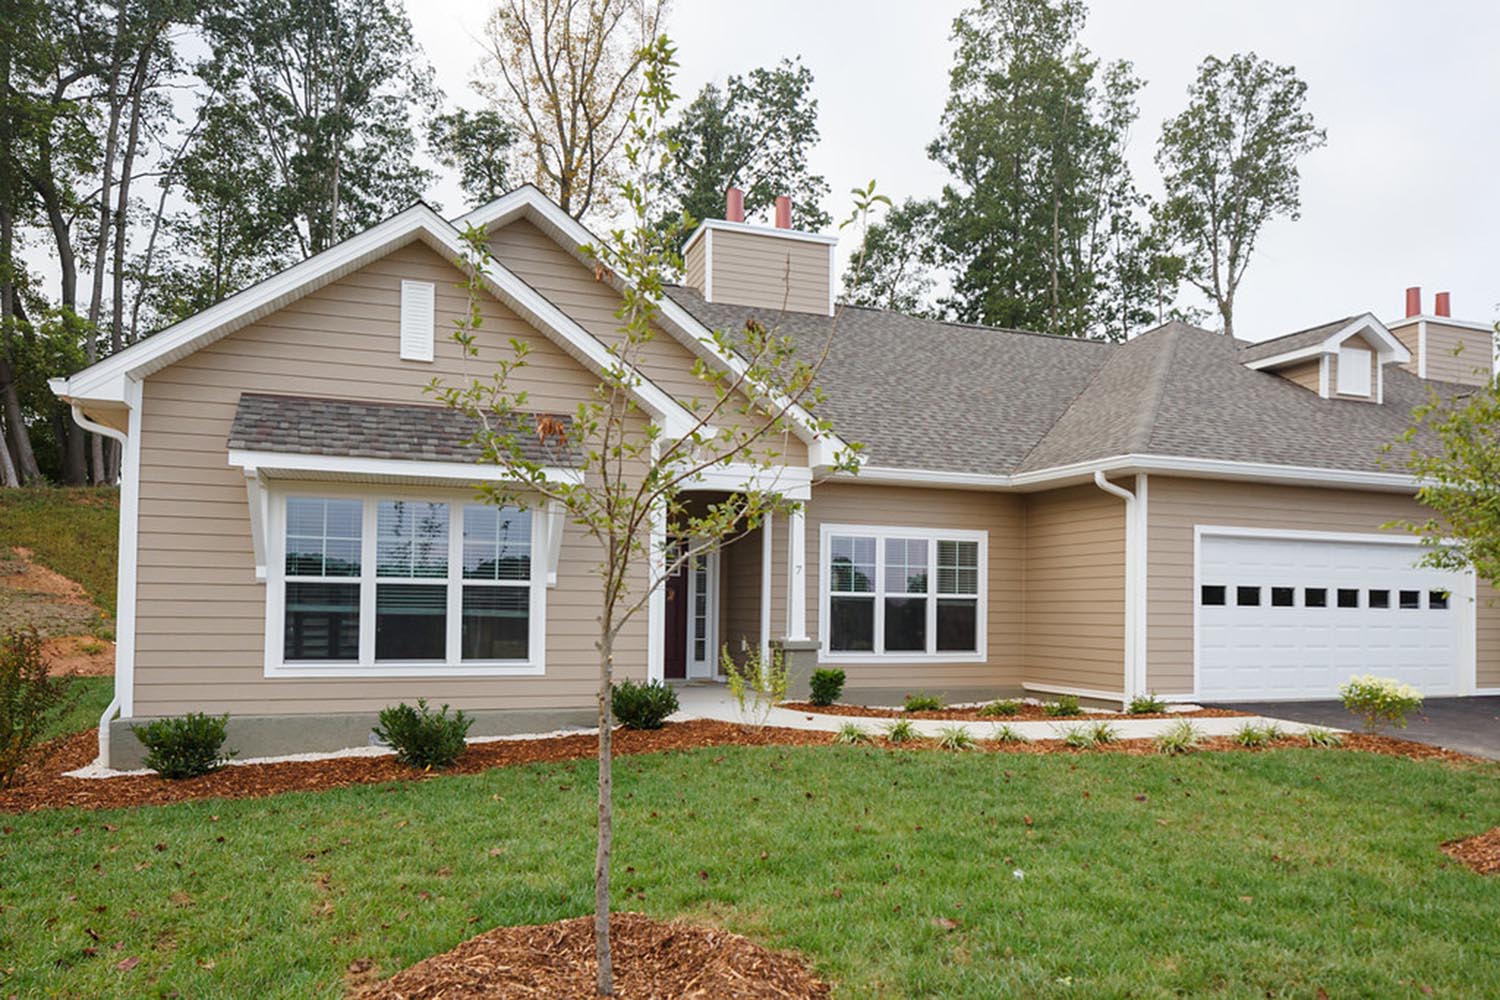 completed new home with landscaping